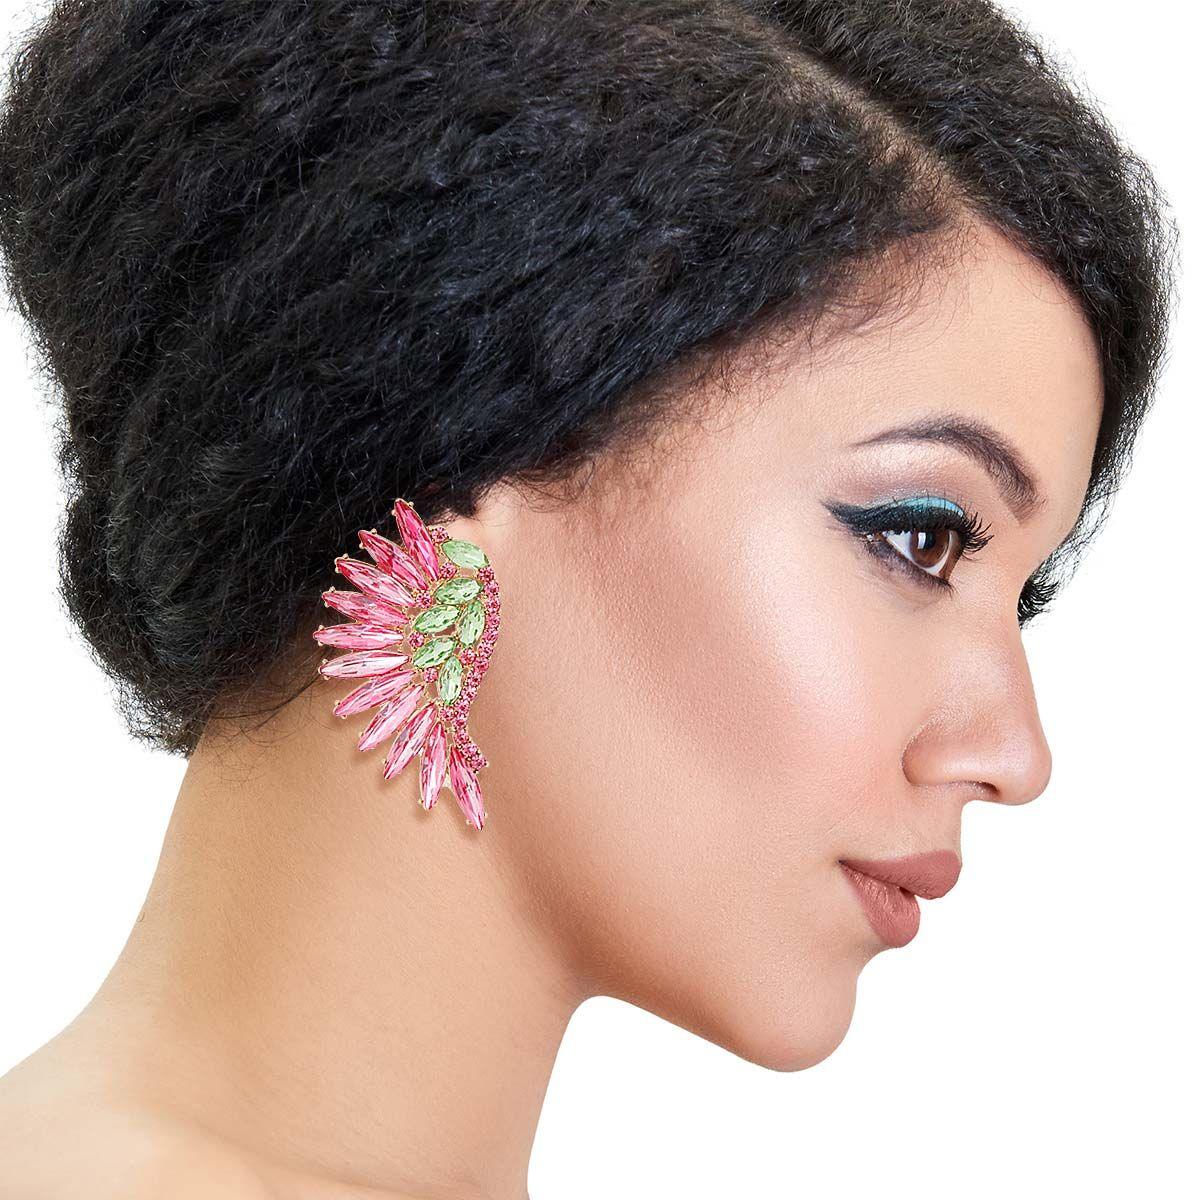 Get Your Gorgeous Angel Wing Earrings in Pink & Green Today!